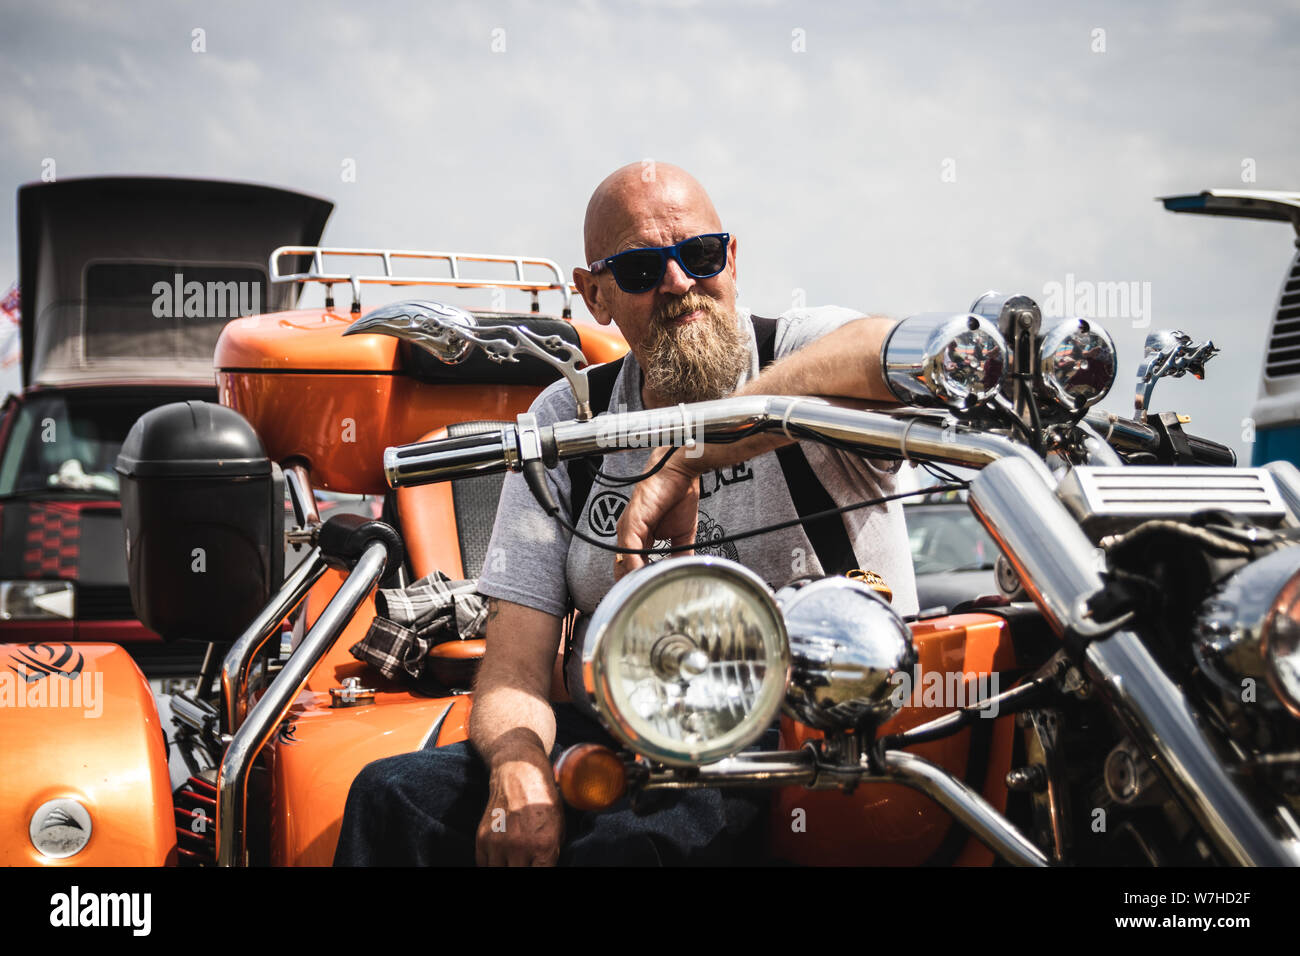 A Portrait of A middle aged biker on his motorcycle Stock Photo